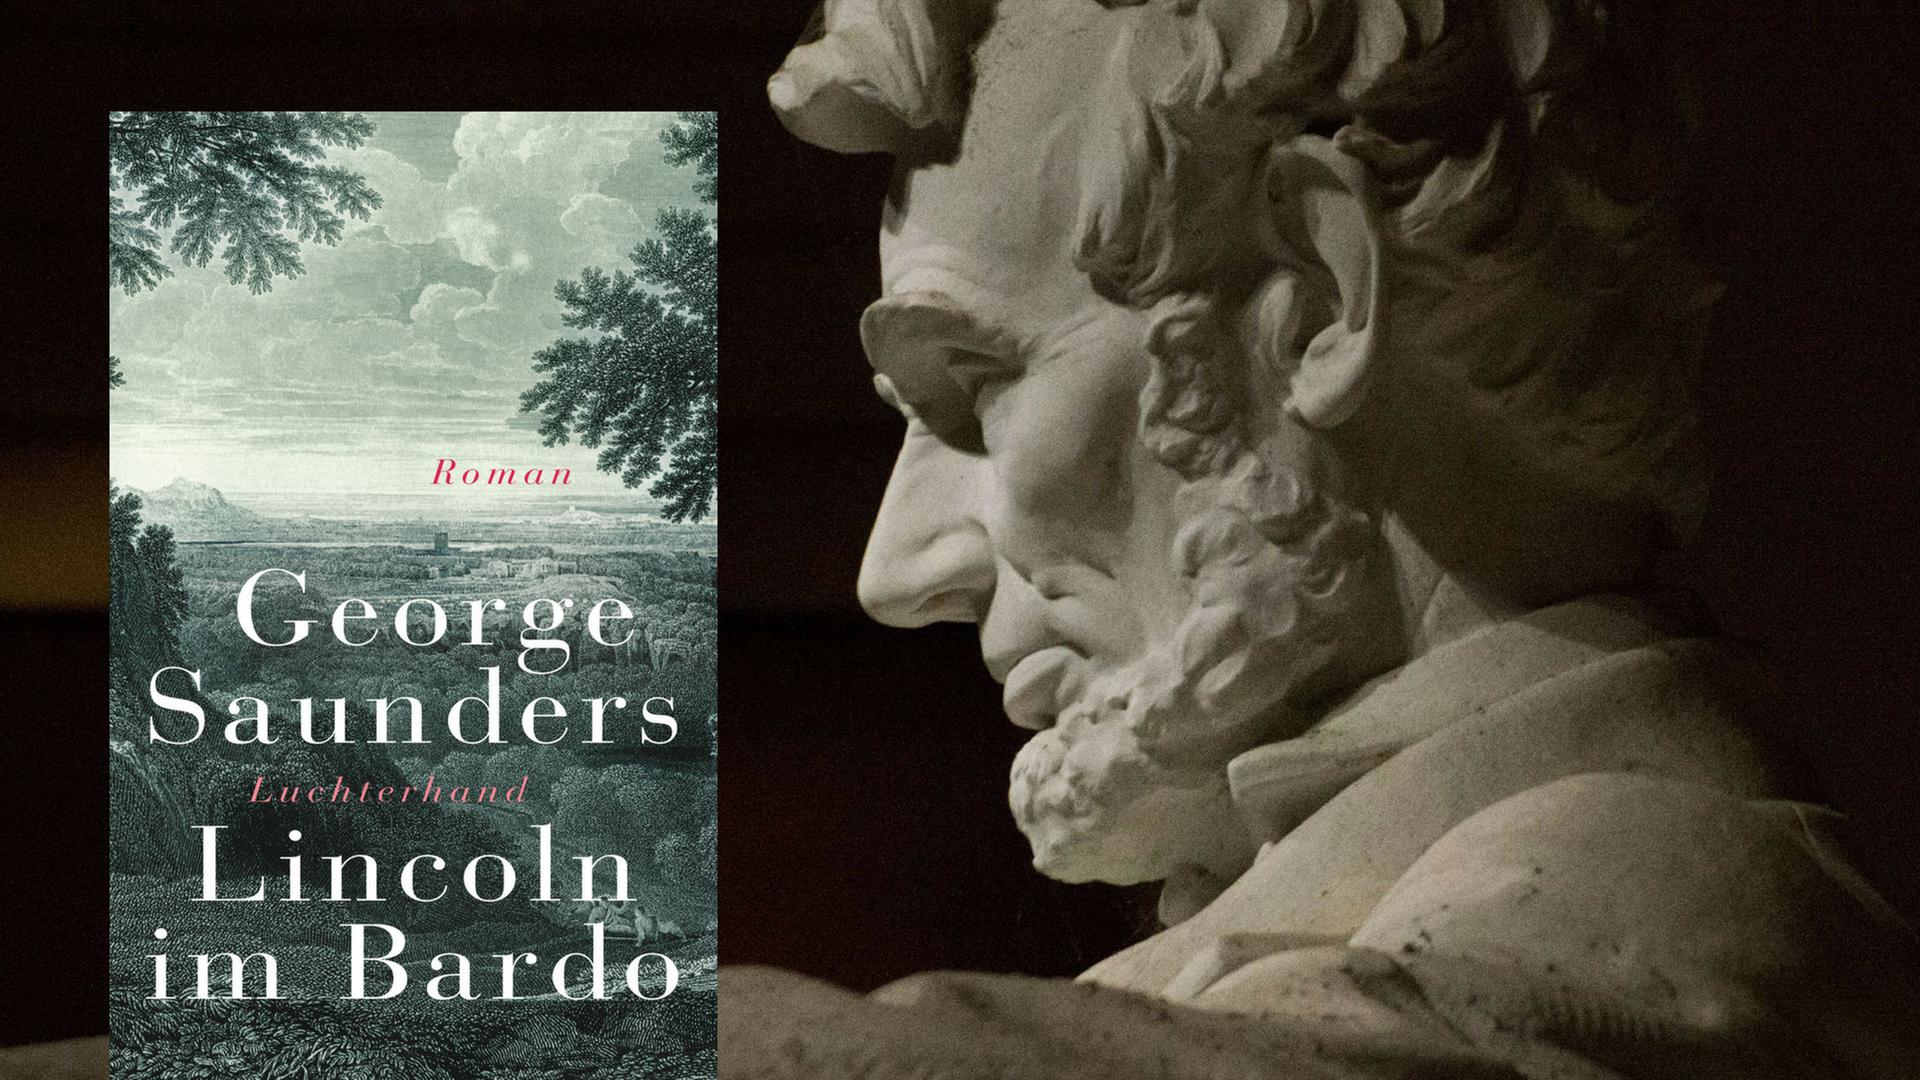 Buchcover: George Saunders: "Lincoln in Bardo"